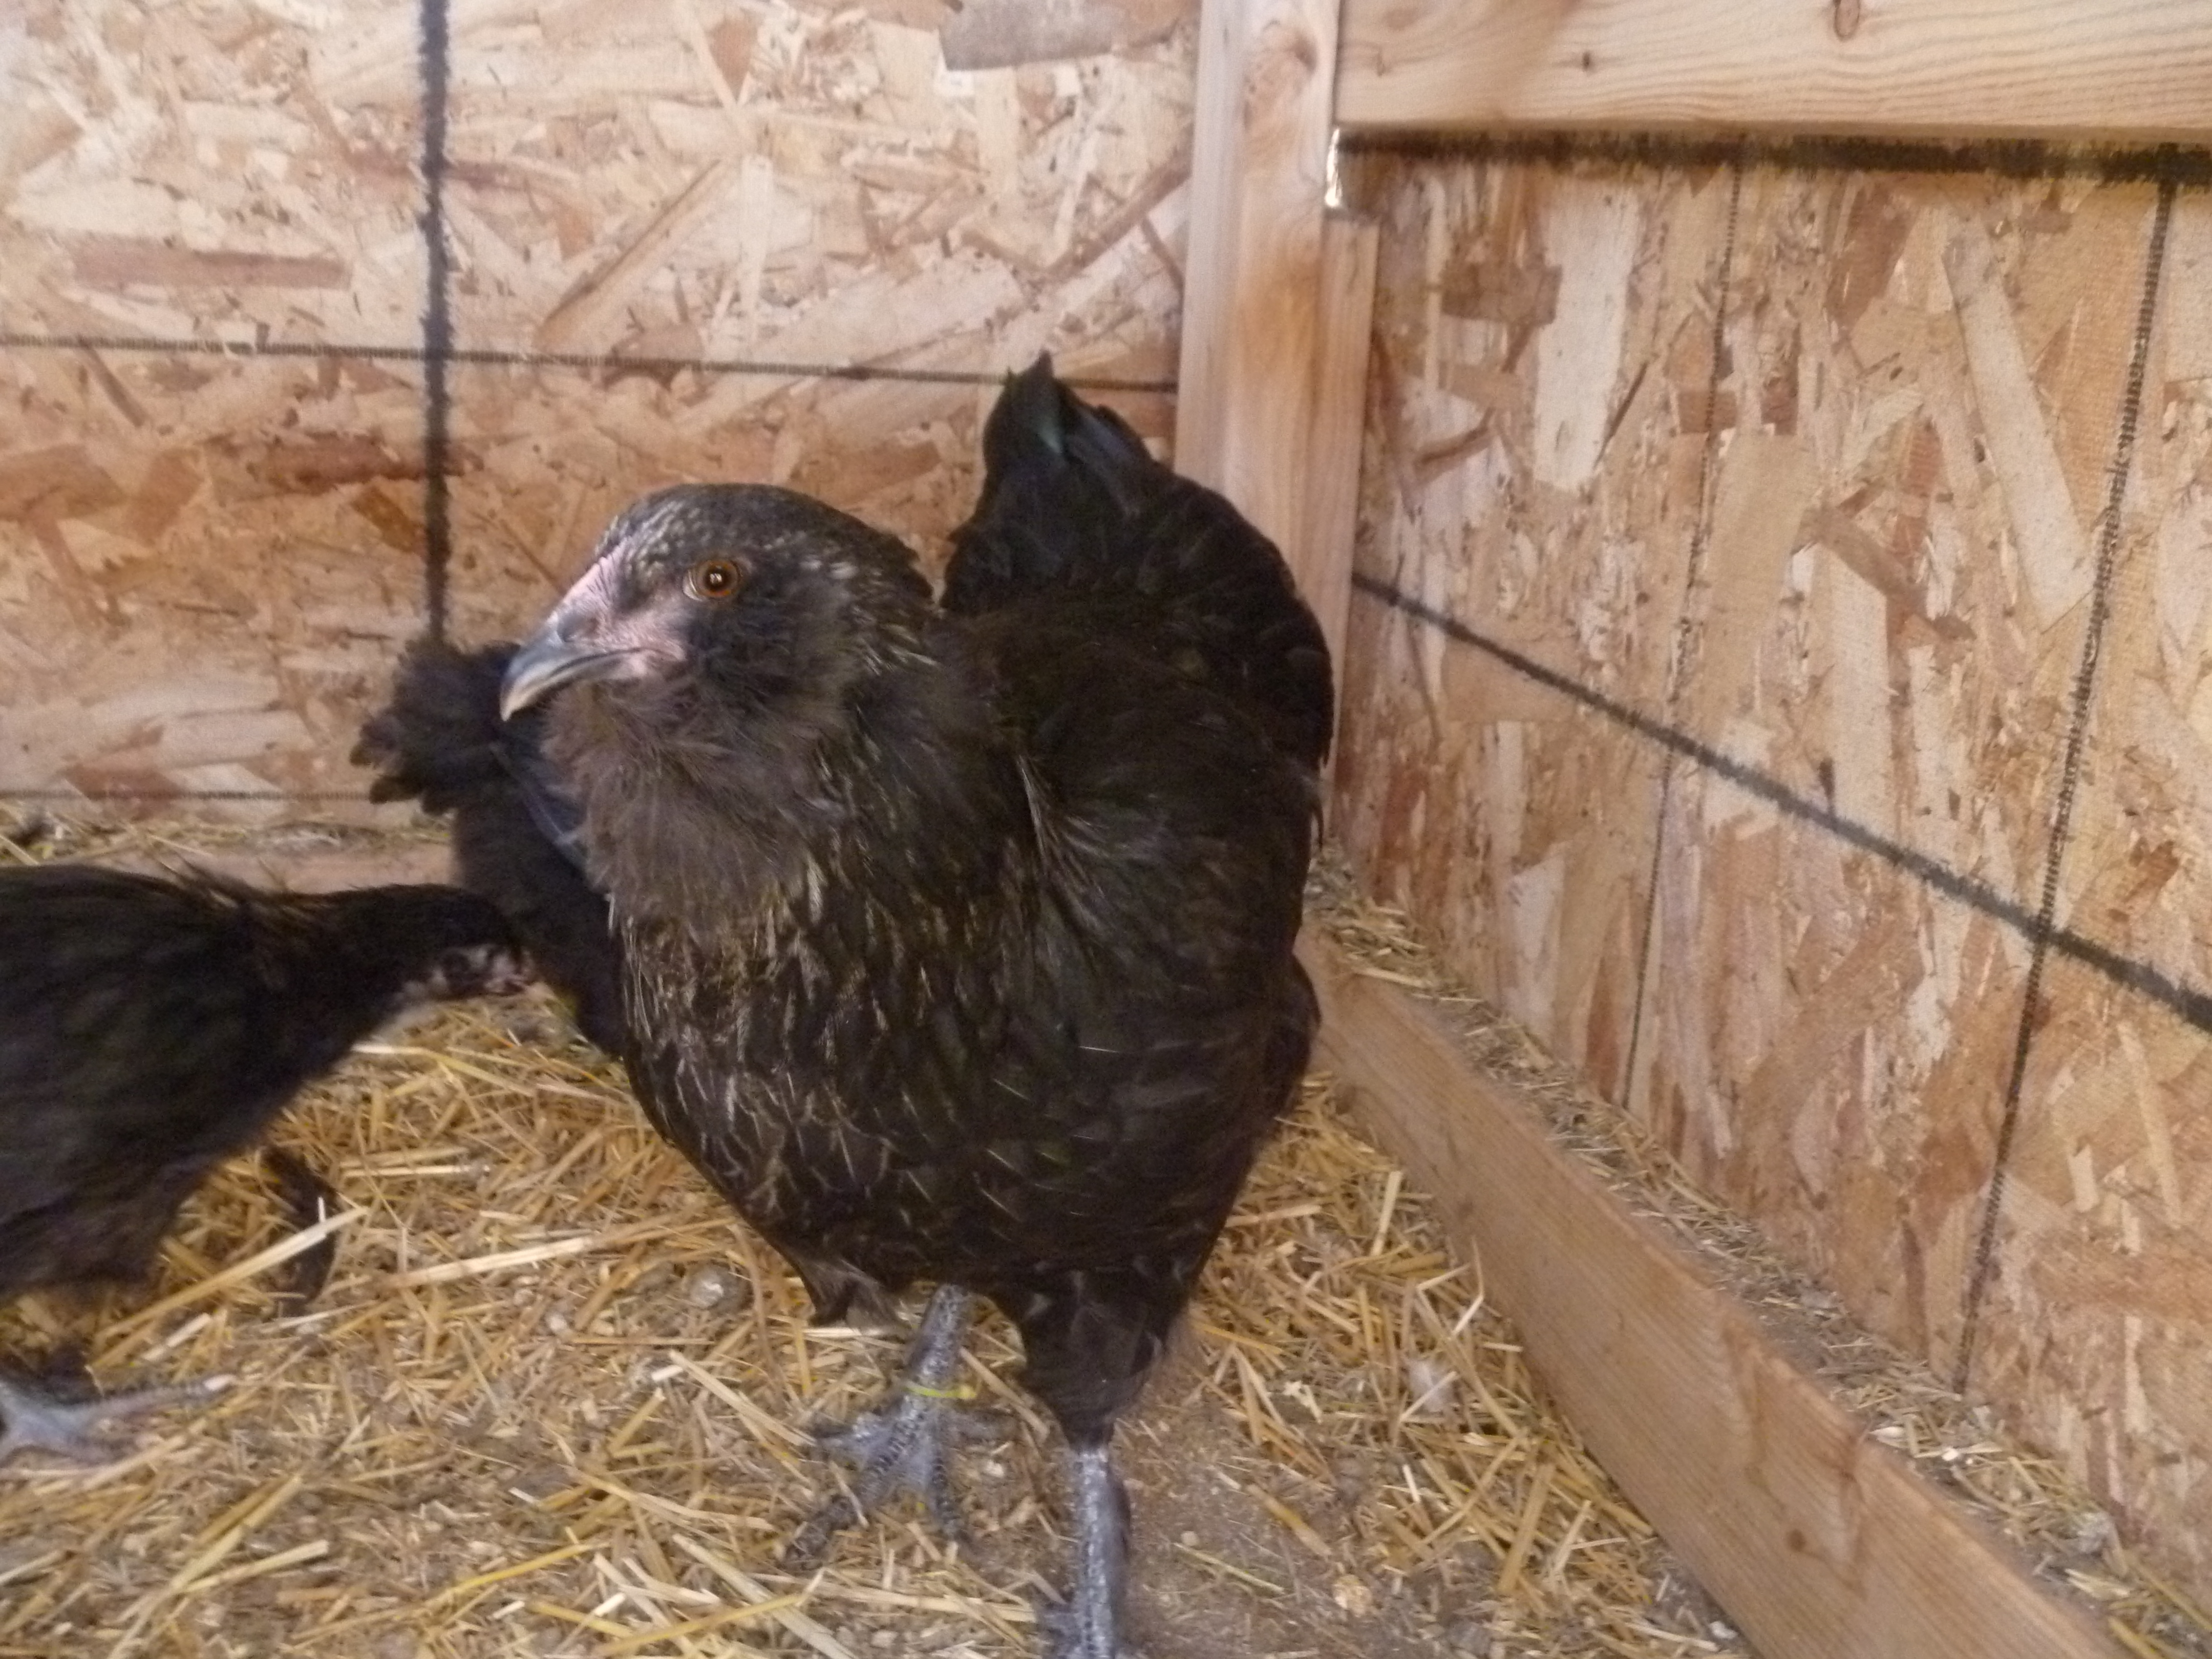 OE pullet from pawtraitart, Silver Ameracauna and Marans mix, 07/15/12